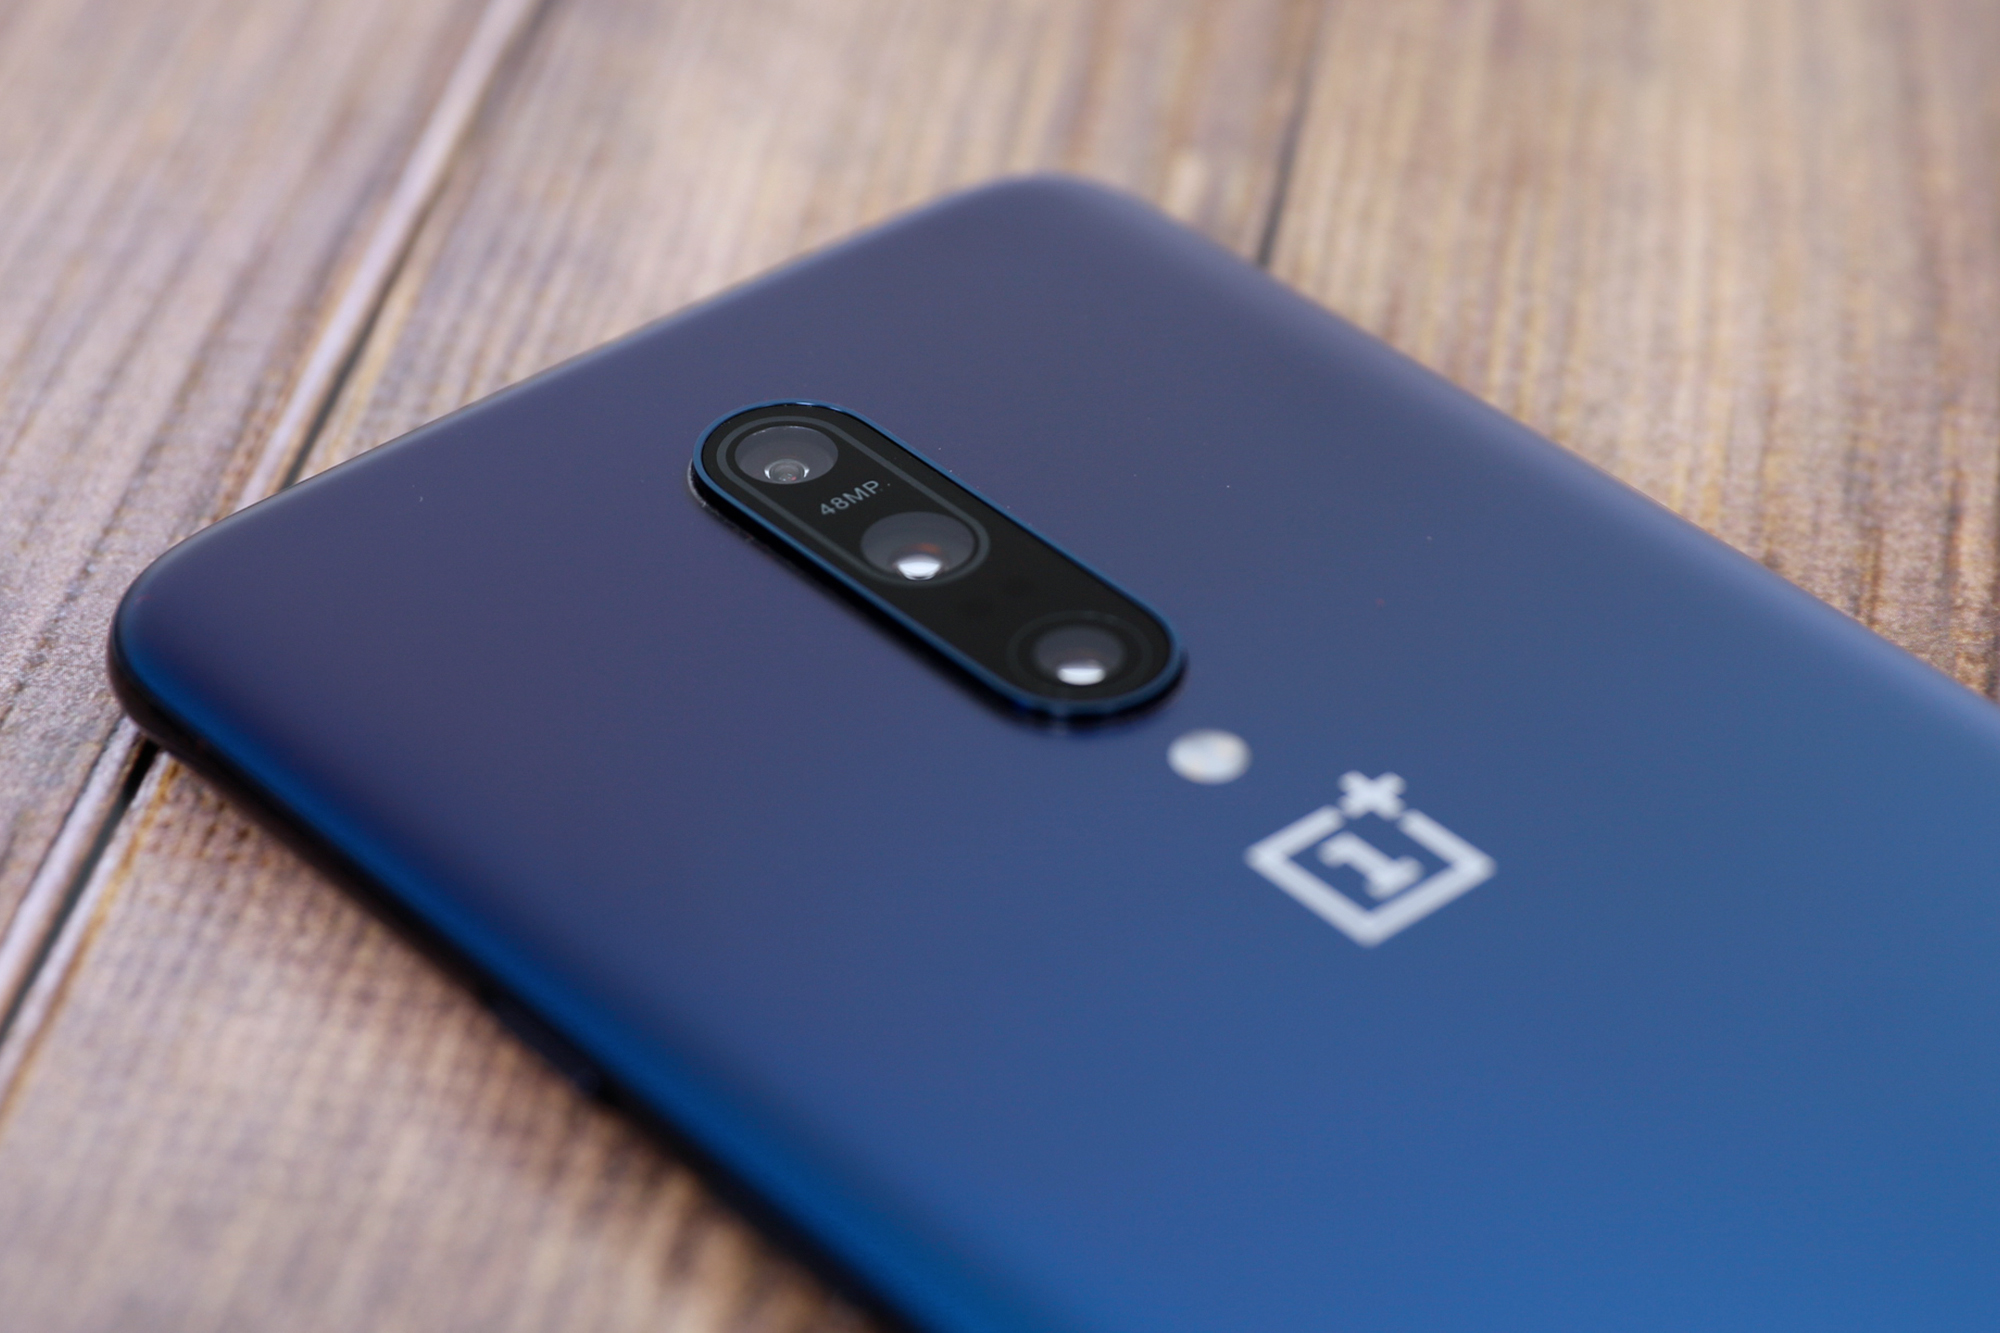 Samsung Galaxy S10, Pixel 3 OnePlus 7 Pro deal offers